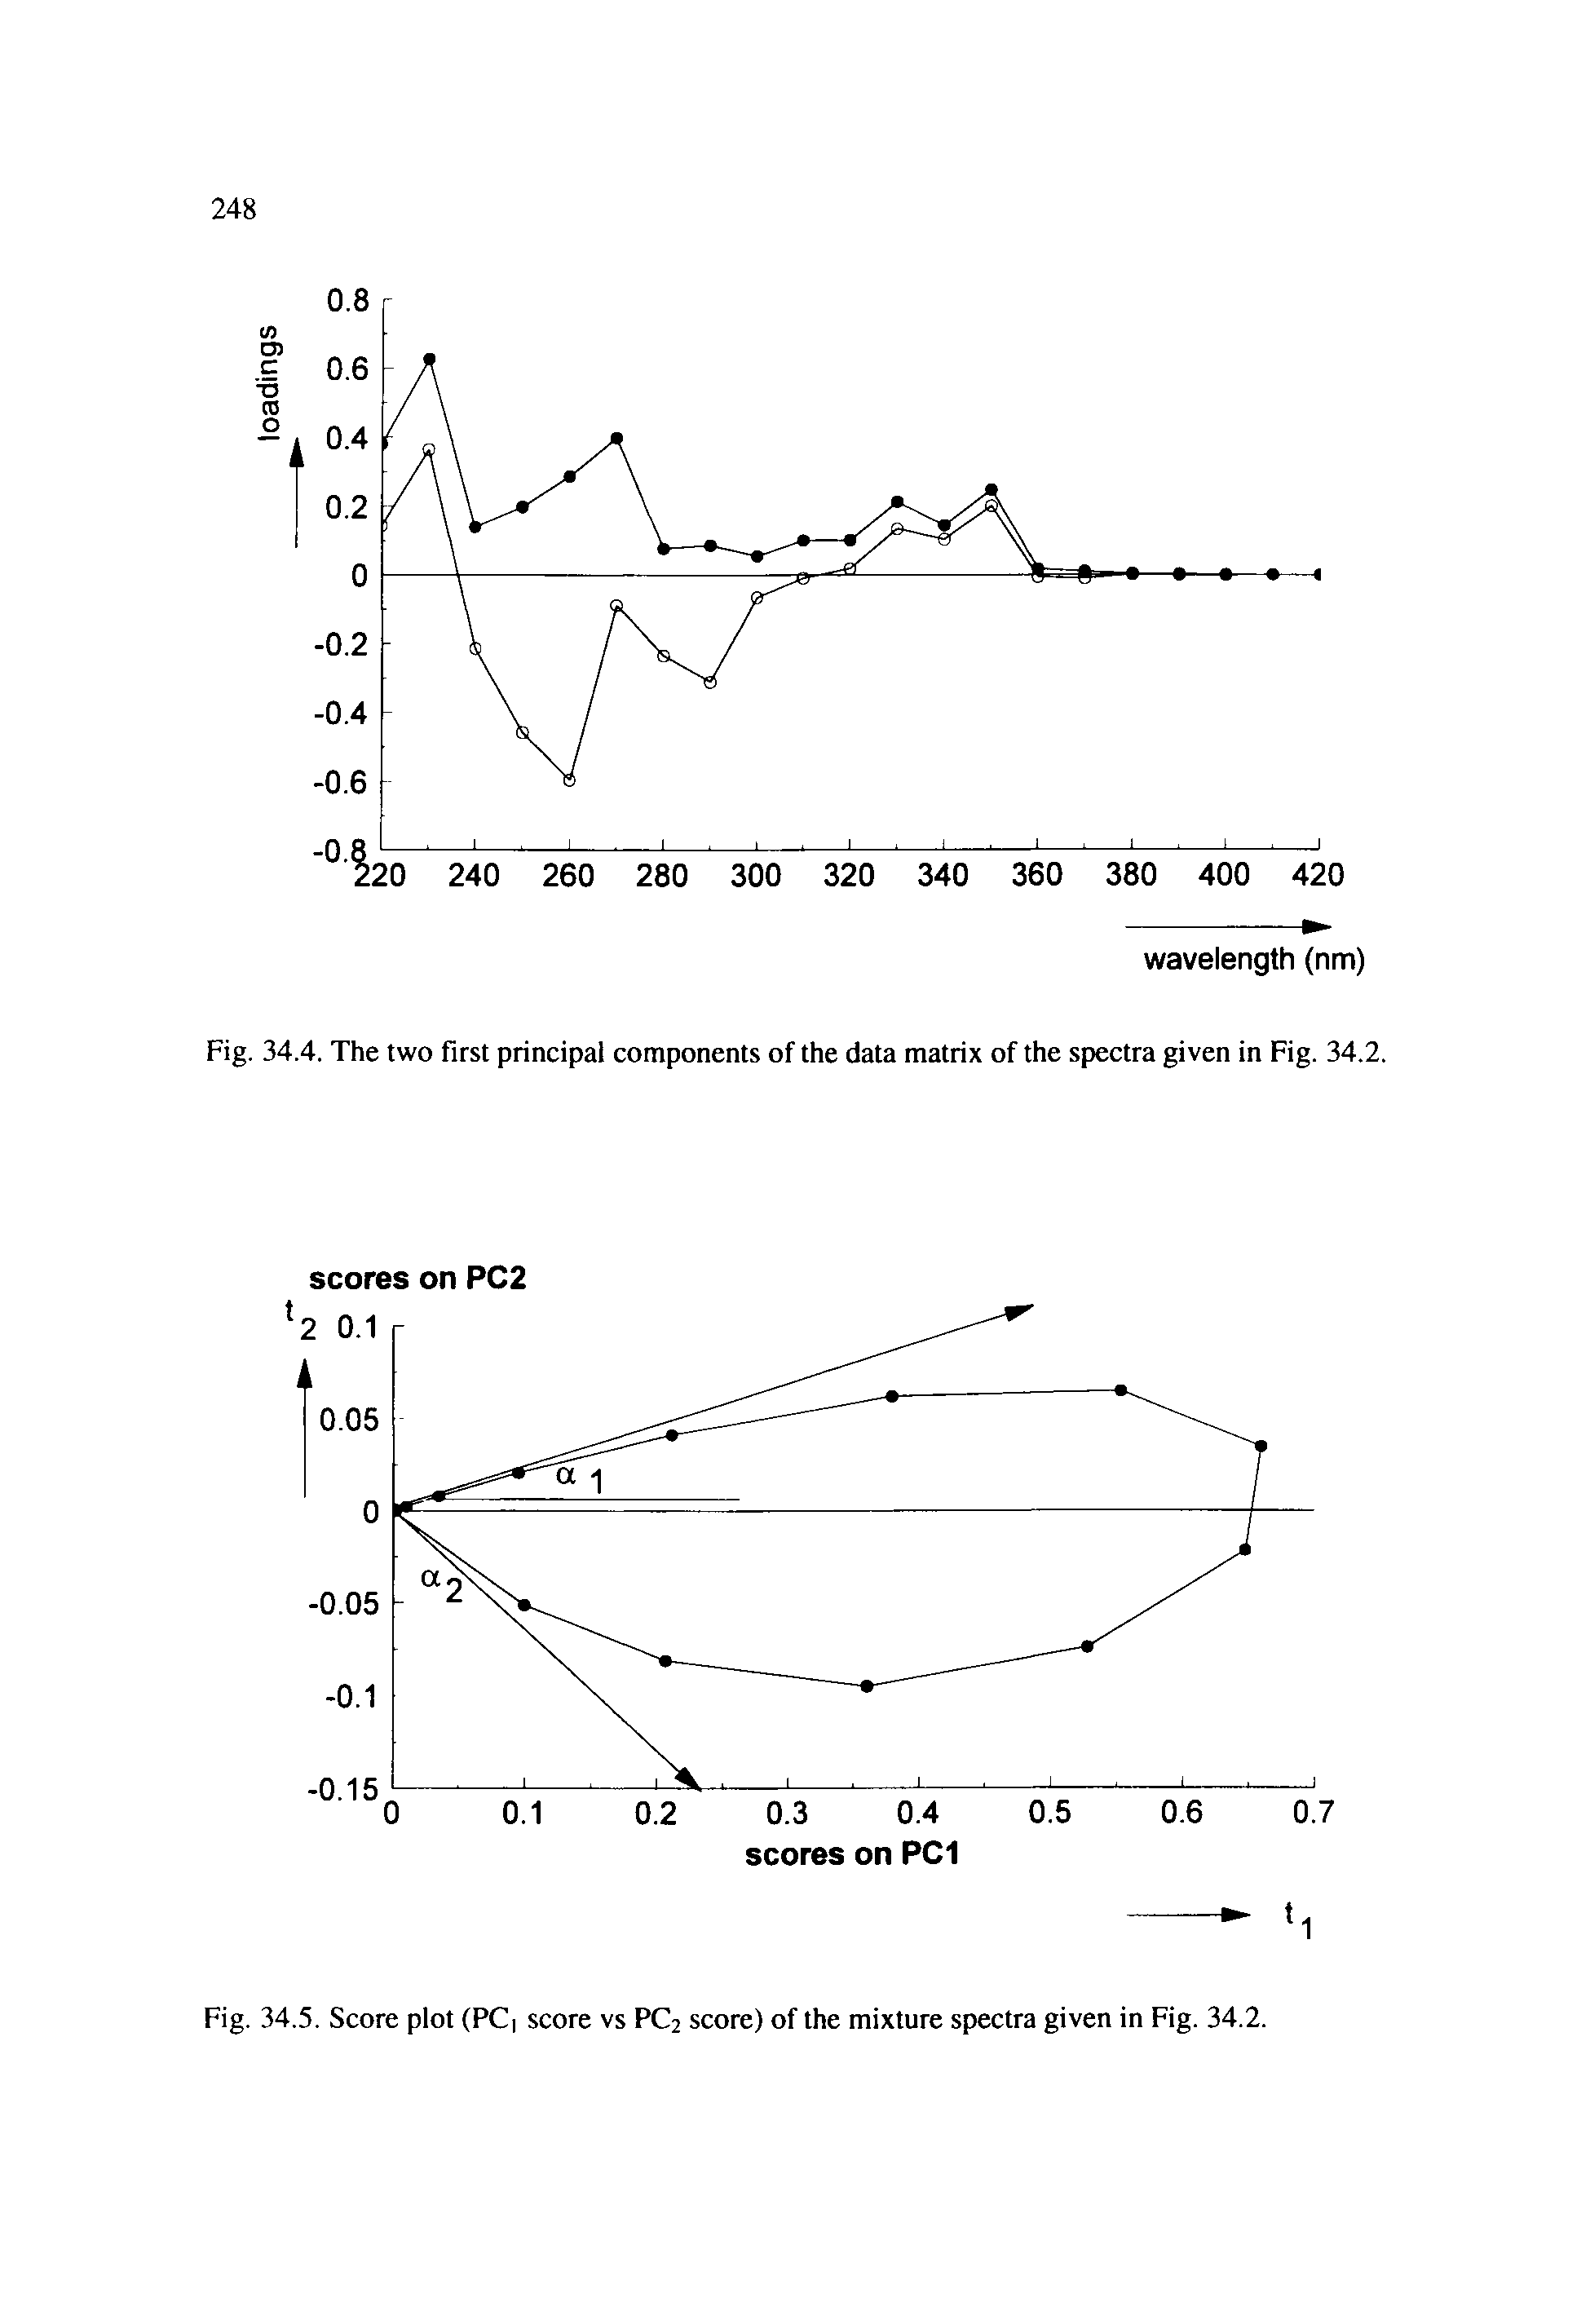 Fig. 34.5. Score plot (PC score vs PC2 score) of the mixture spectra given in Fig. 34.2.